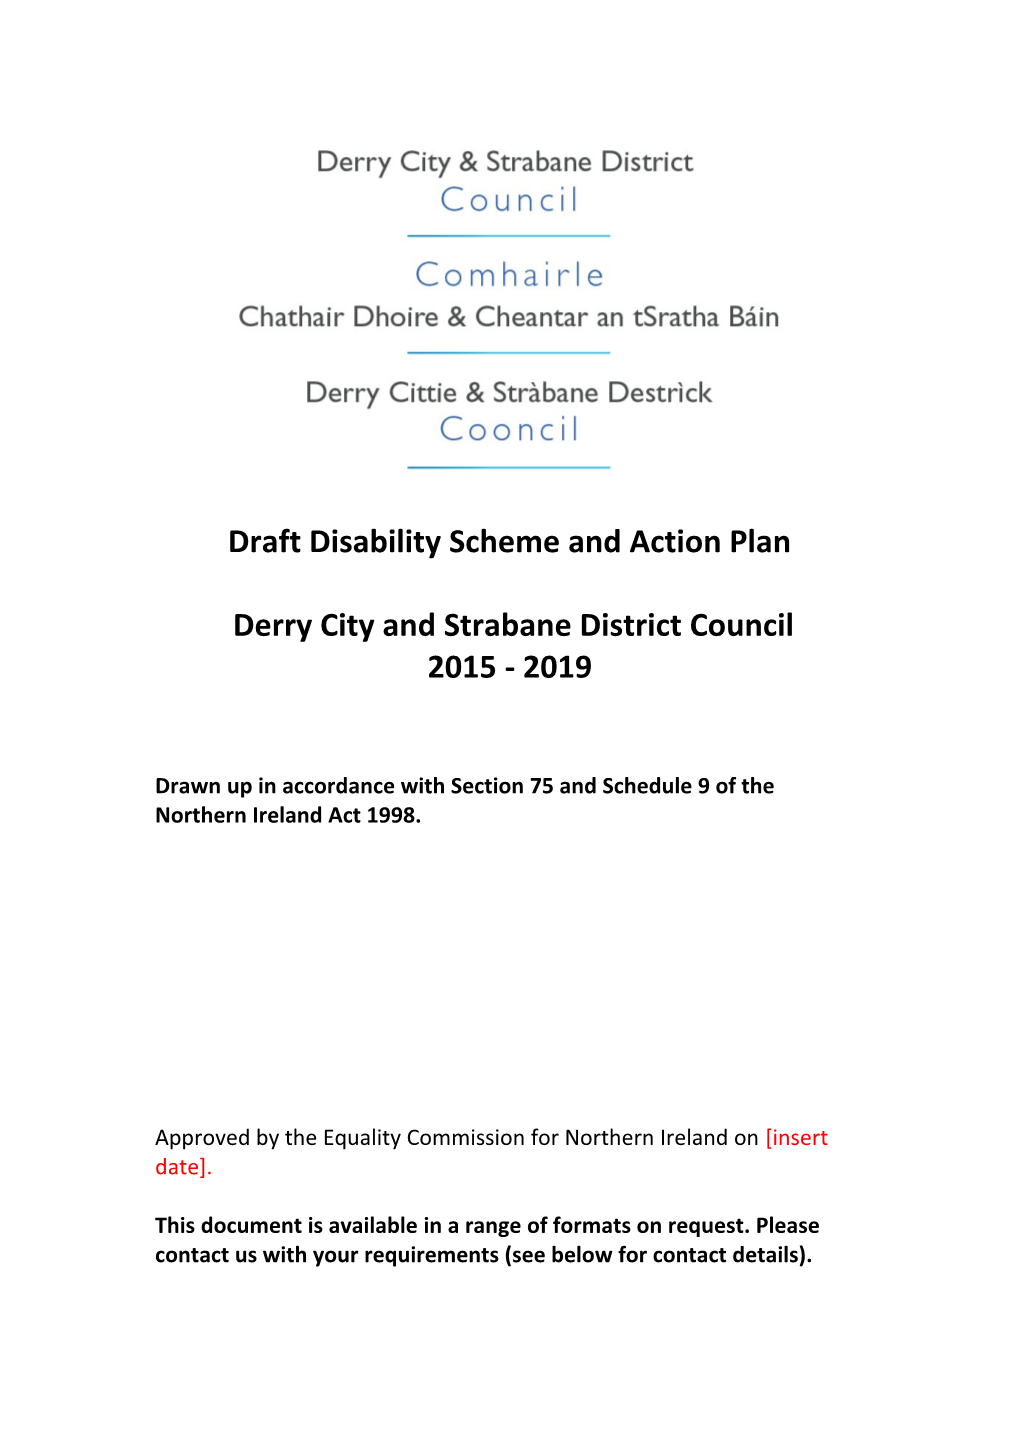 Draft Disability Action Plan For